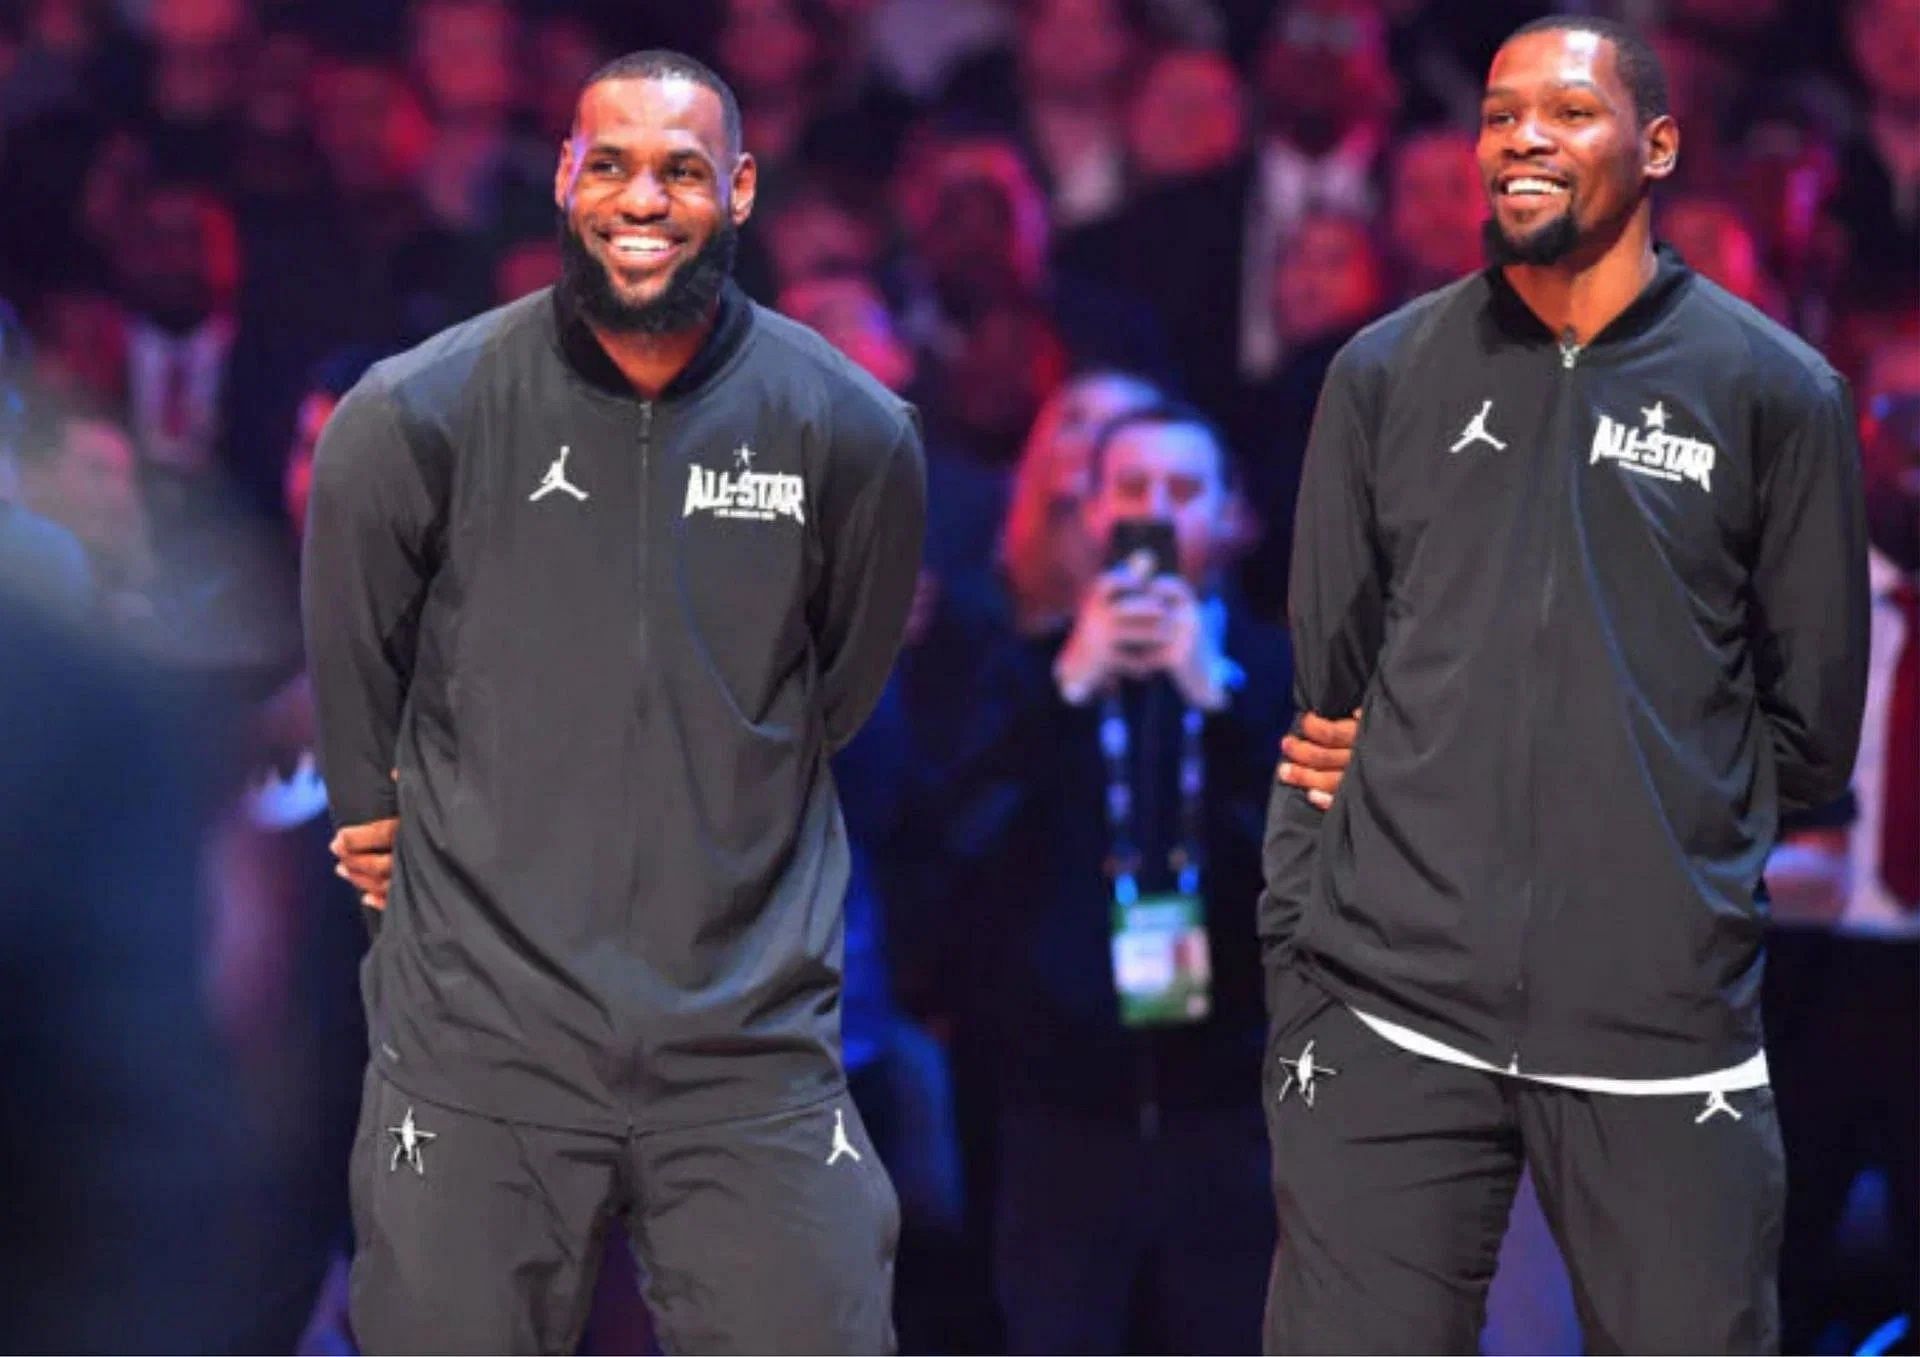 The long-awaited encounter of LeBron James (L) and Kevin Durant (R) after five years was featured in the Lakers-Suns showdown on Thursday.